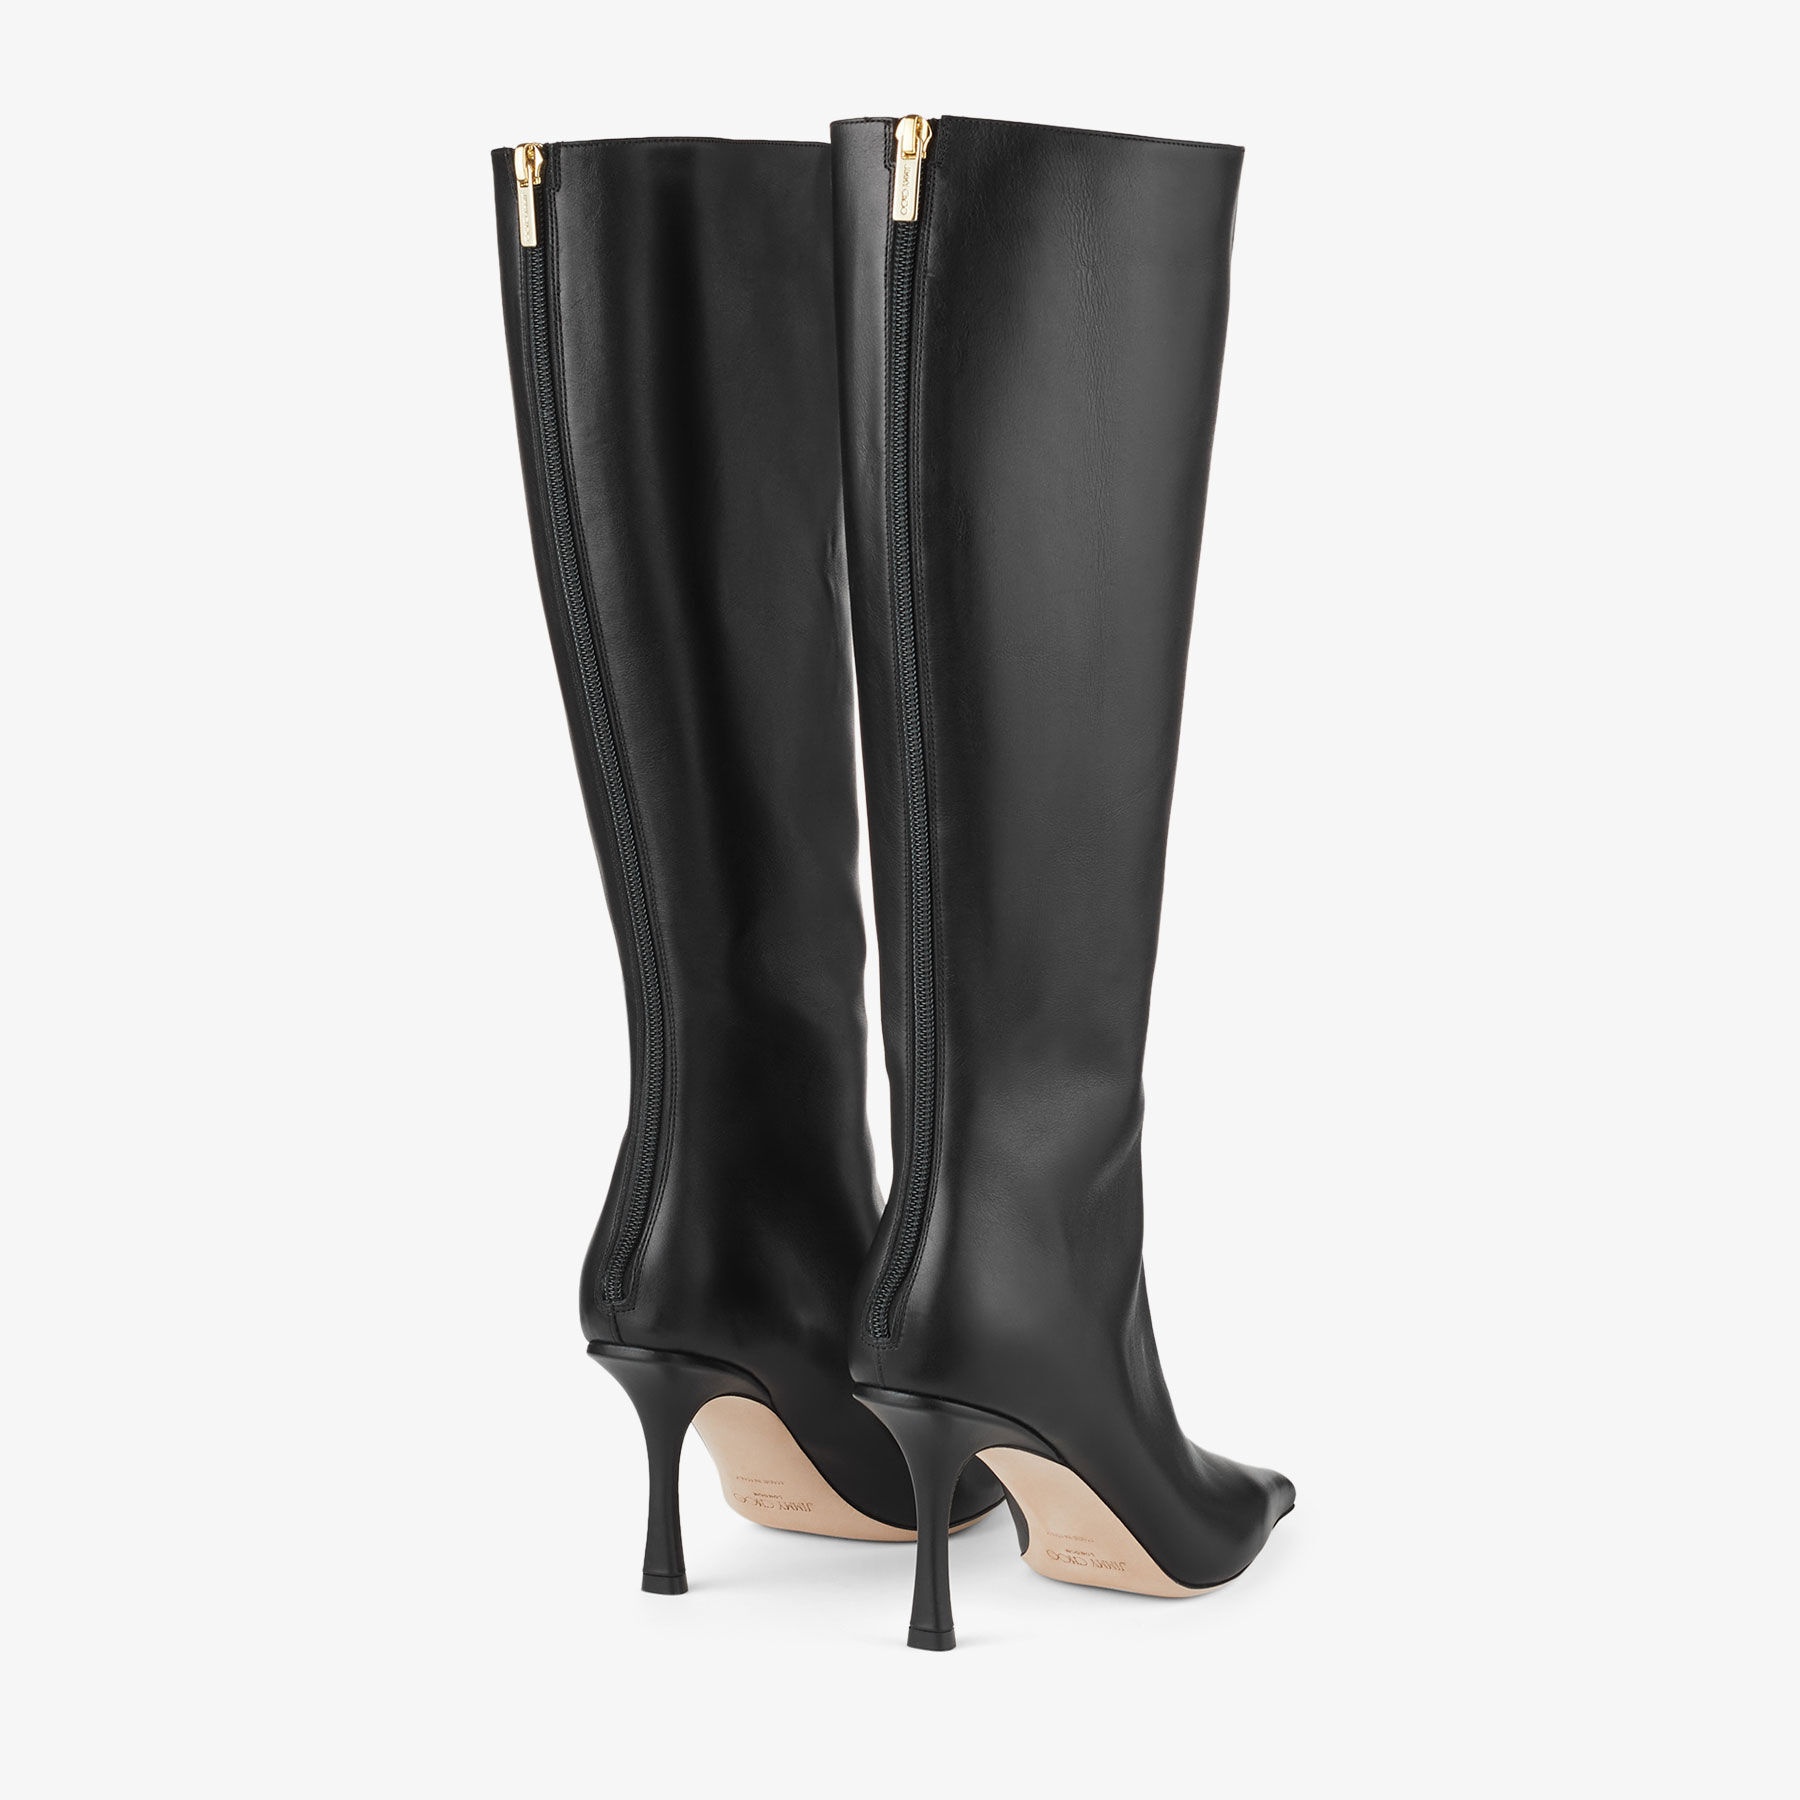 Agathe Knee Boot 85
Black Calf Leather Knee-High Boots - 6